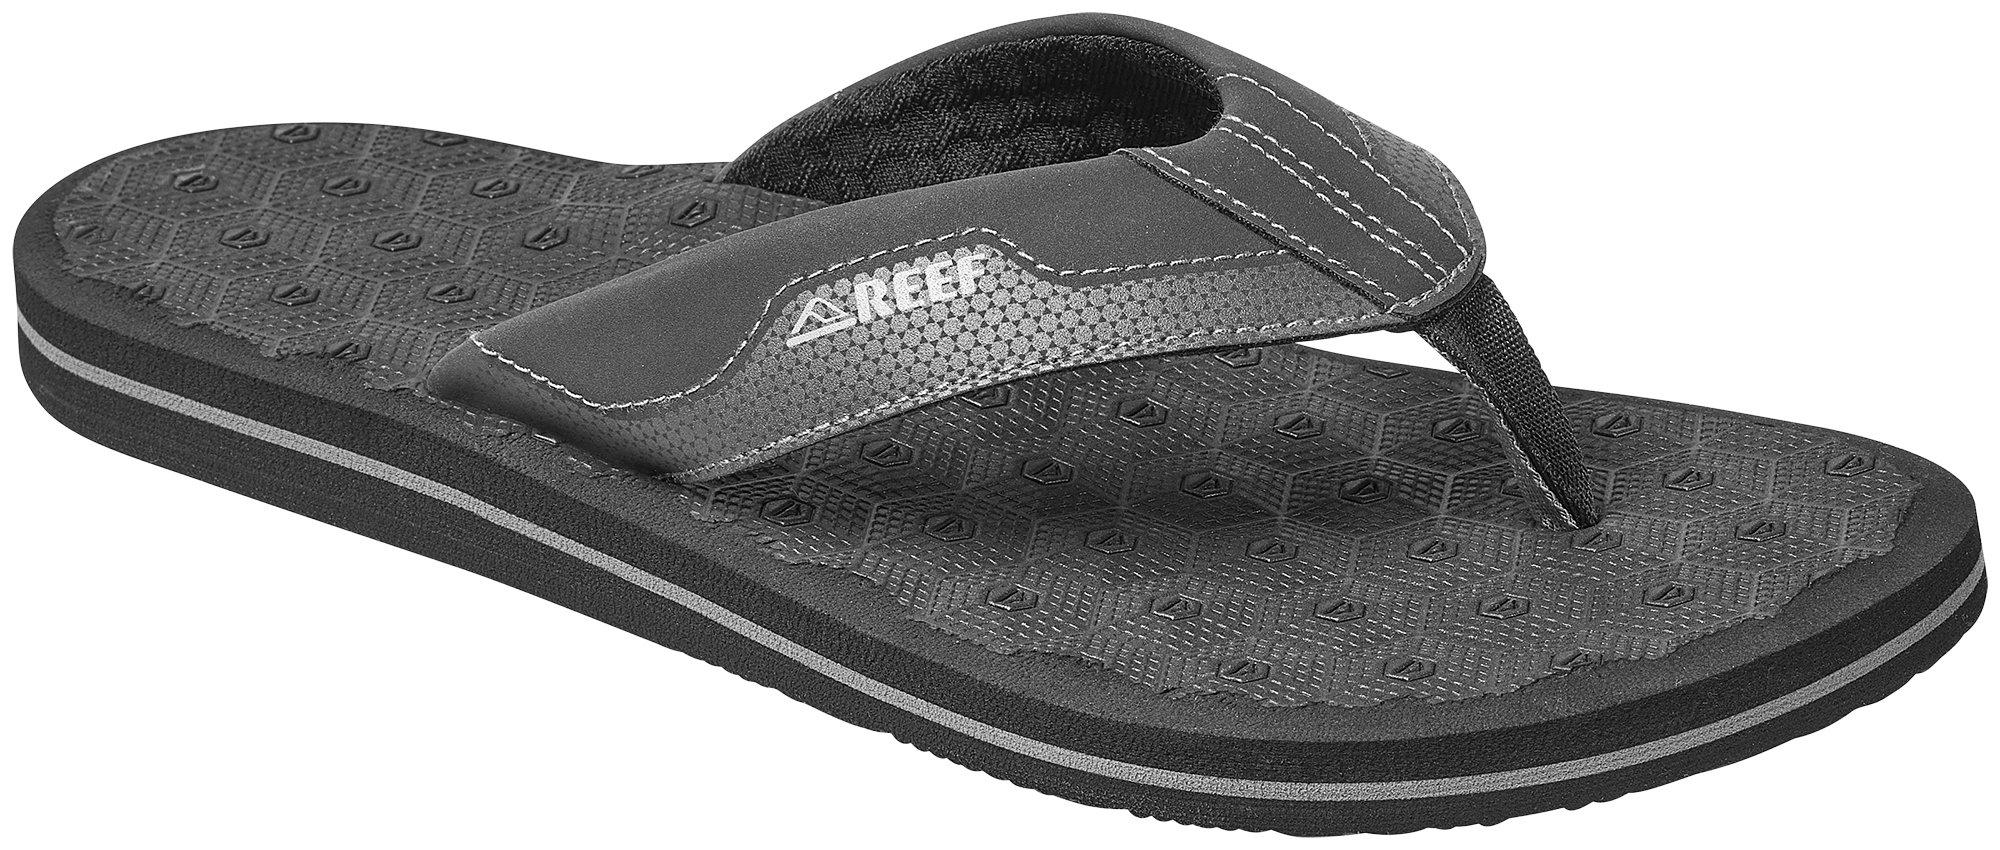 Reef Mens The Ripper Sandals